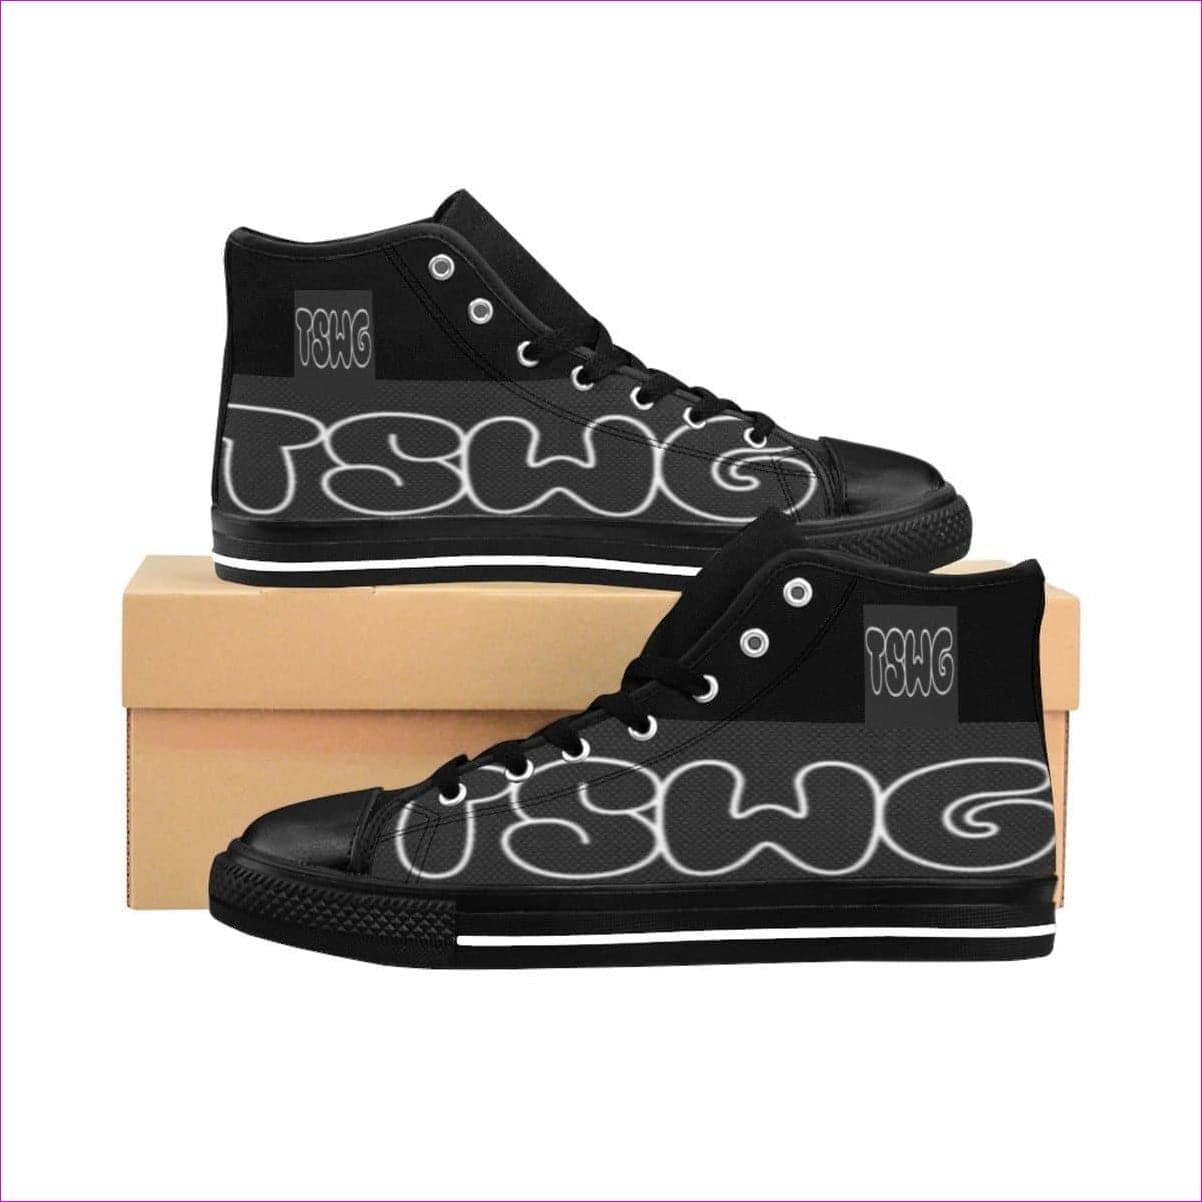 Black TSWG (Tough Smooth Well Groomed) Men's High-top Sneakers - men's shoe at TFC&H Co.